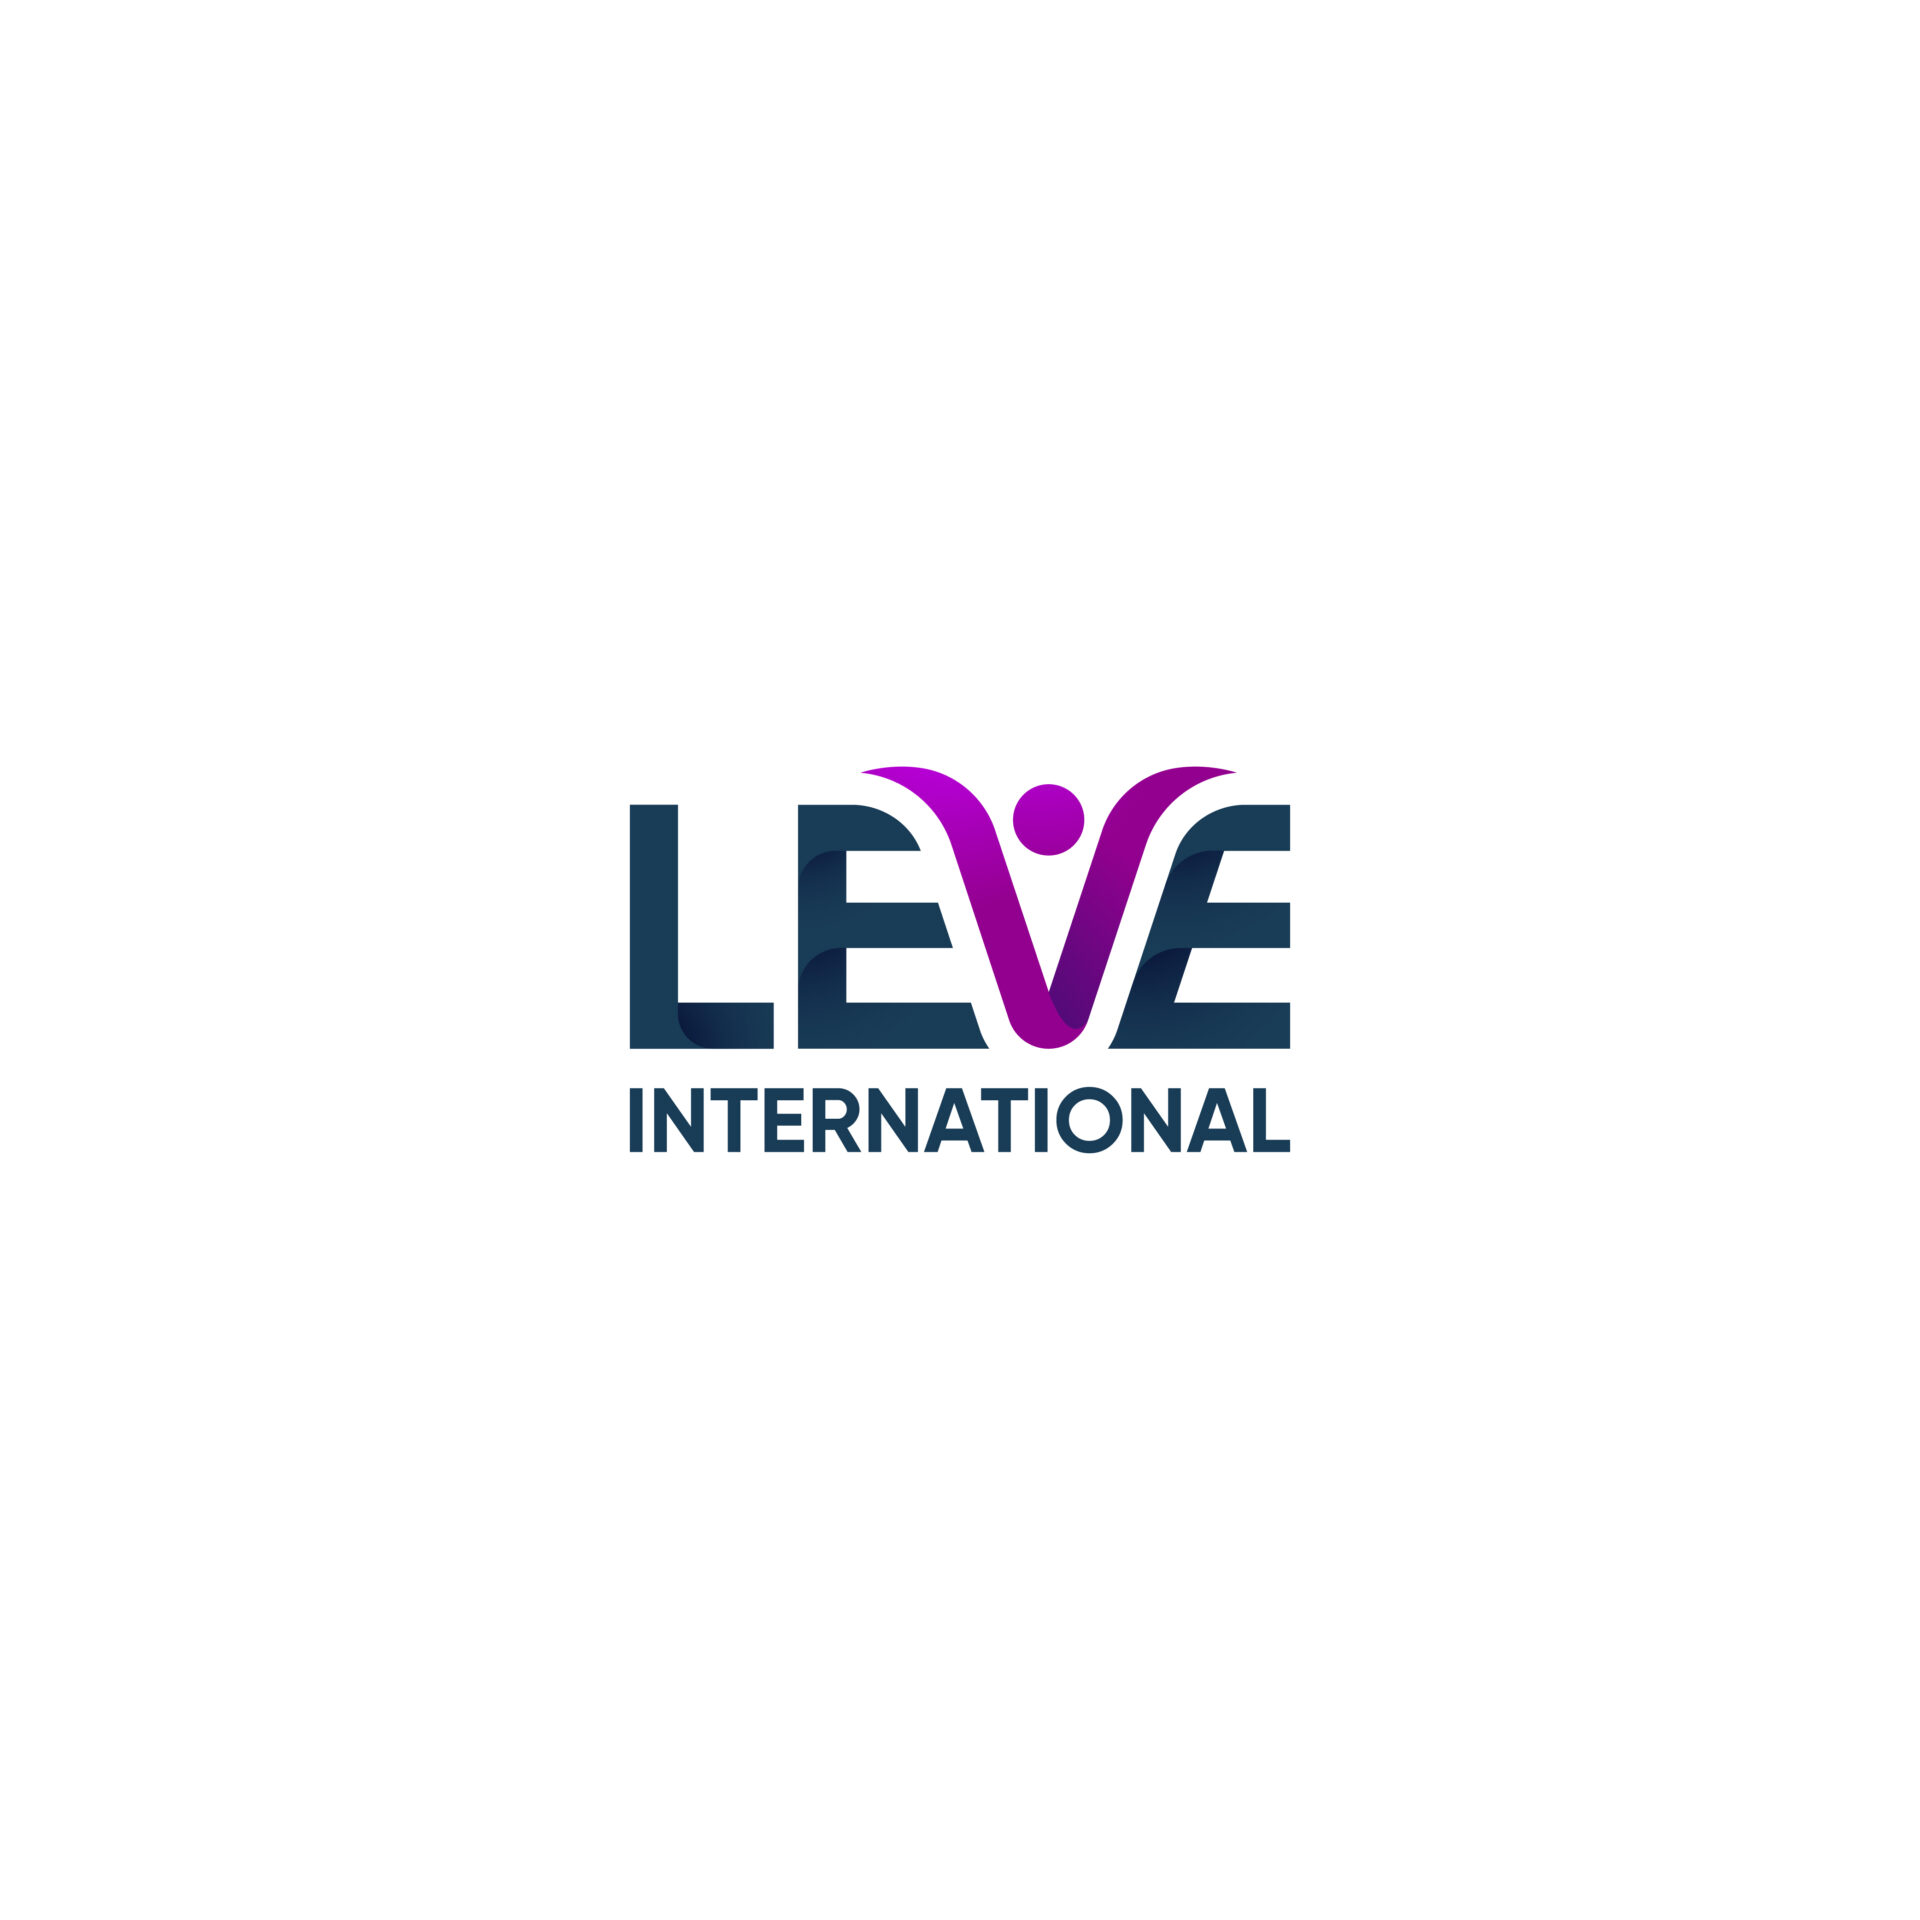 LEVE INTERNATIONAL is a non-profit organization established in 2013 in Atlanta, Georgia, with a goal to enhance the leadership skills of local leaders globally by offering reskilling, upskilling, and behavior change training. The organization started its operations in Haiti in 2017 and expanded to Kenya in Africa in 2022. The objective is to develop leaders who can then pass on their knowledge to their respective communities for their success.